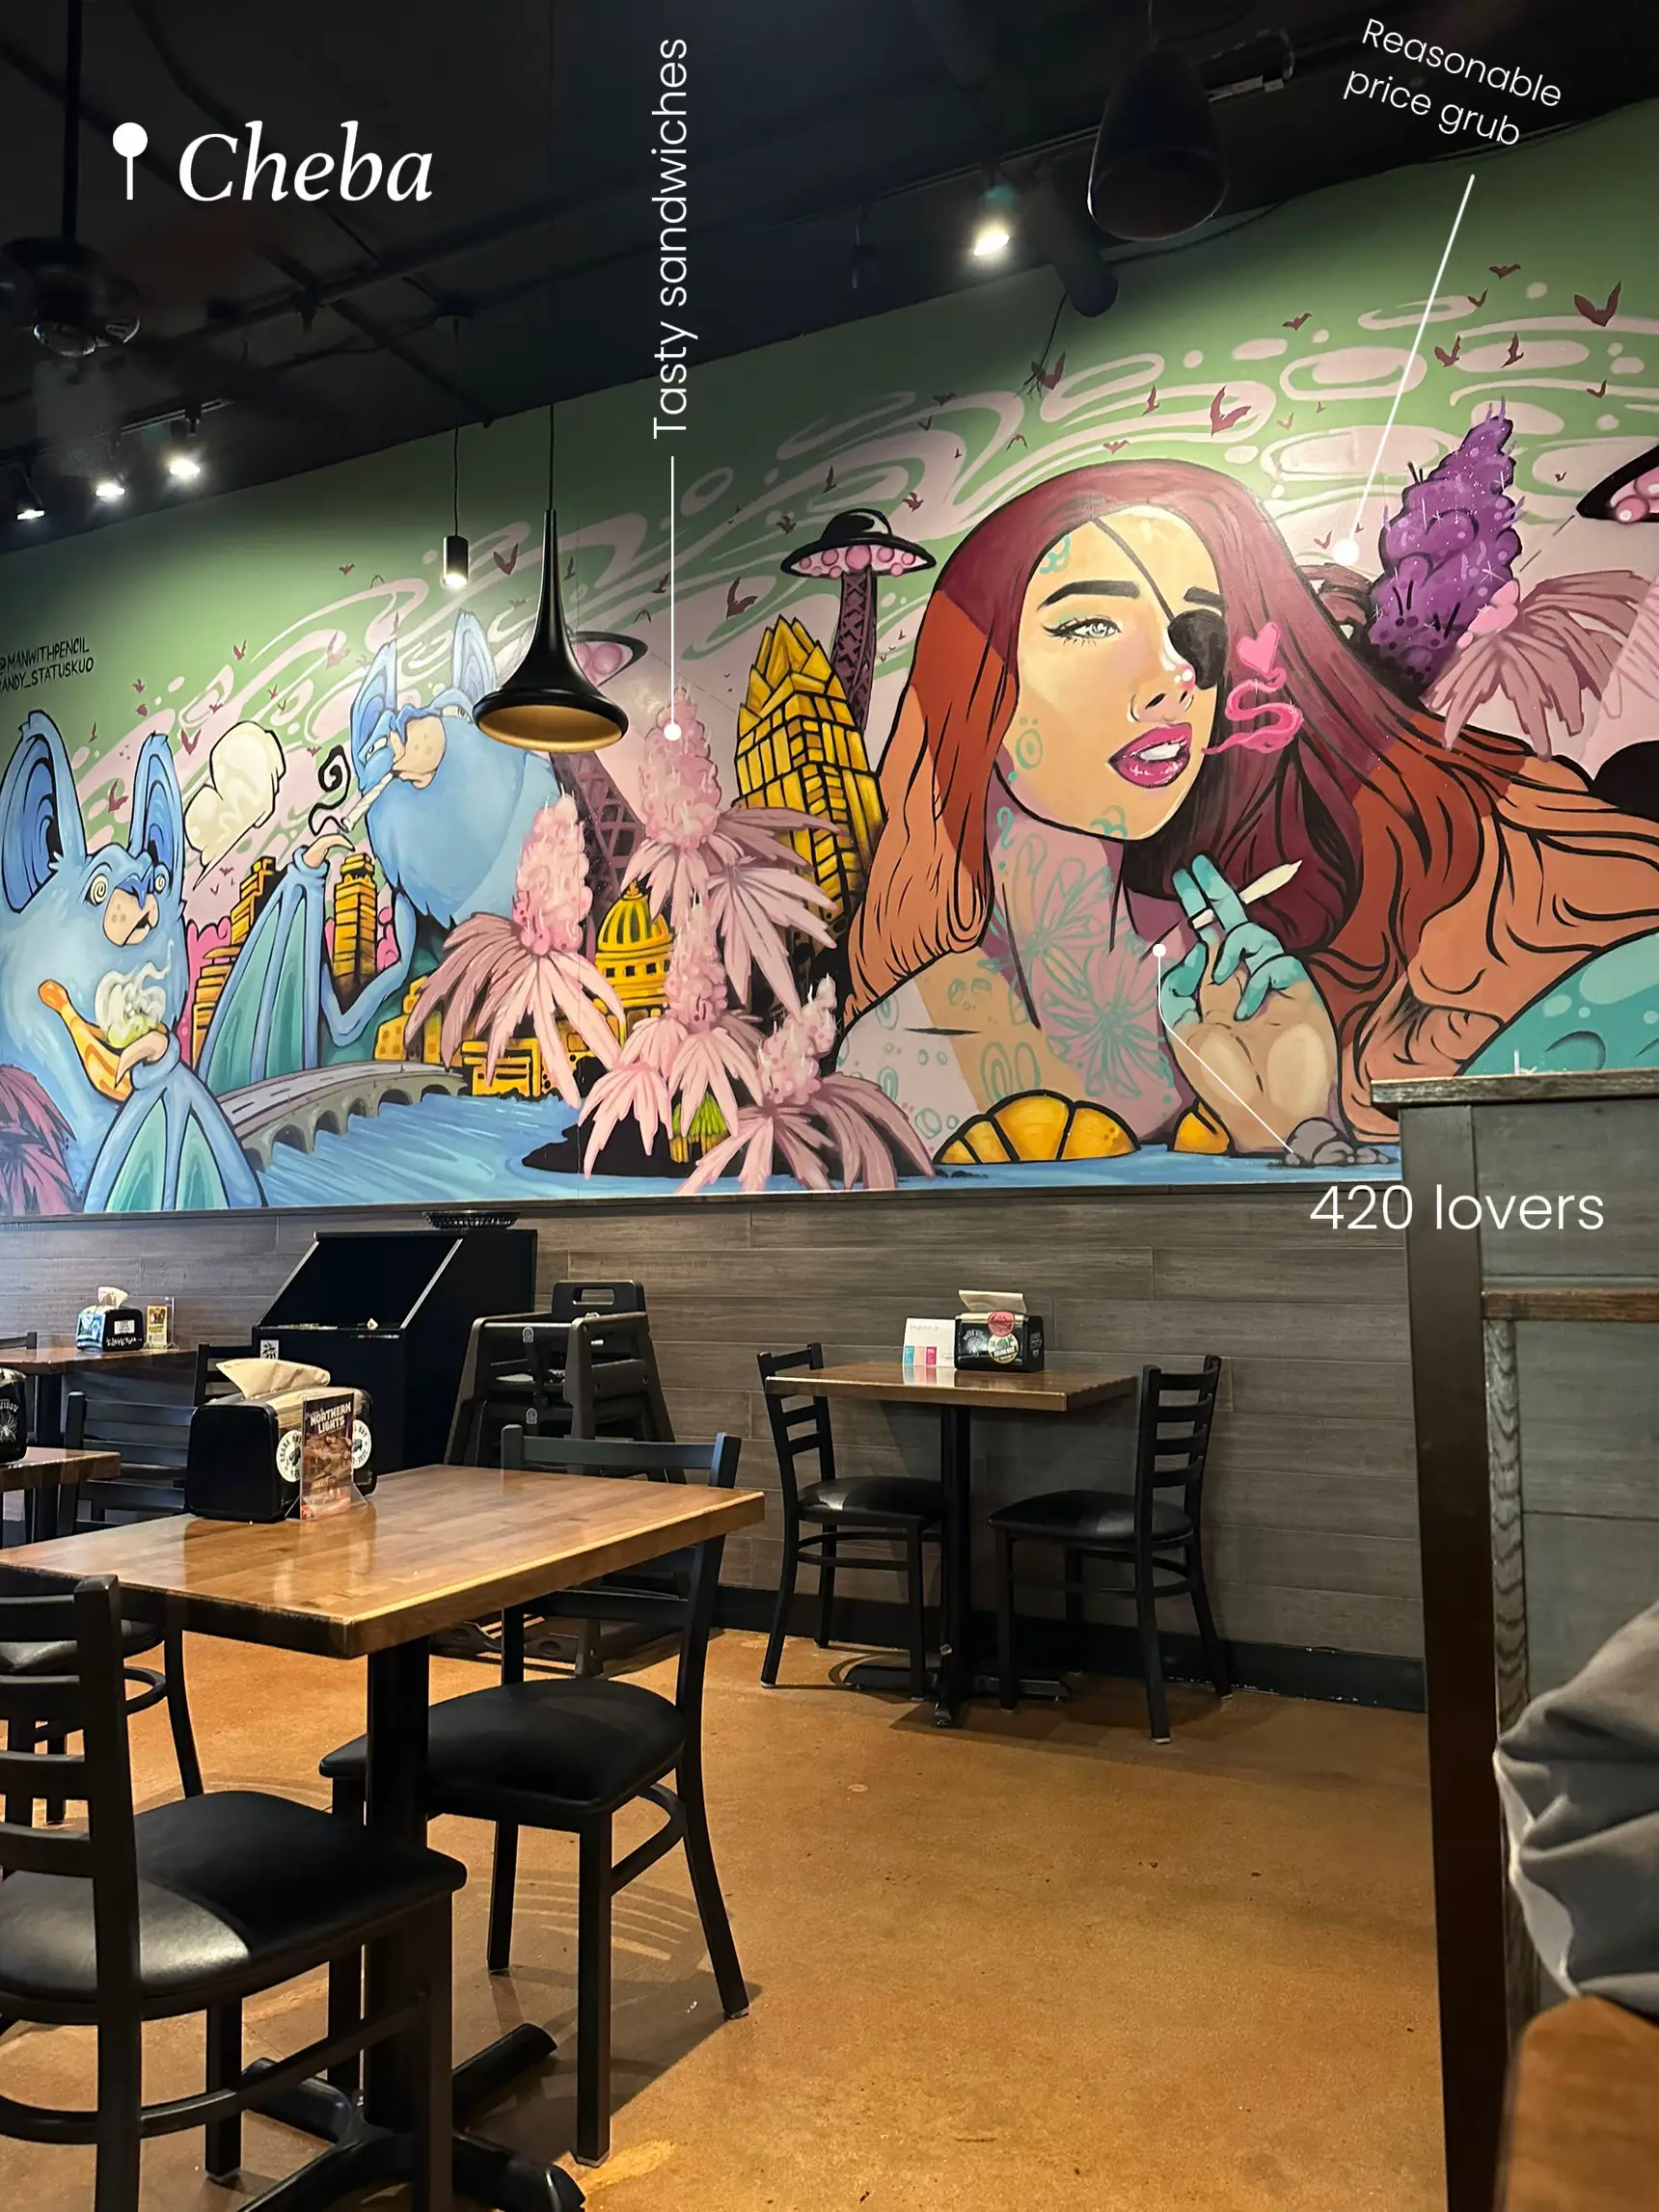  A restaurant with a large mural on the wall and a menu that says "Reasonable price grub".